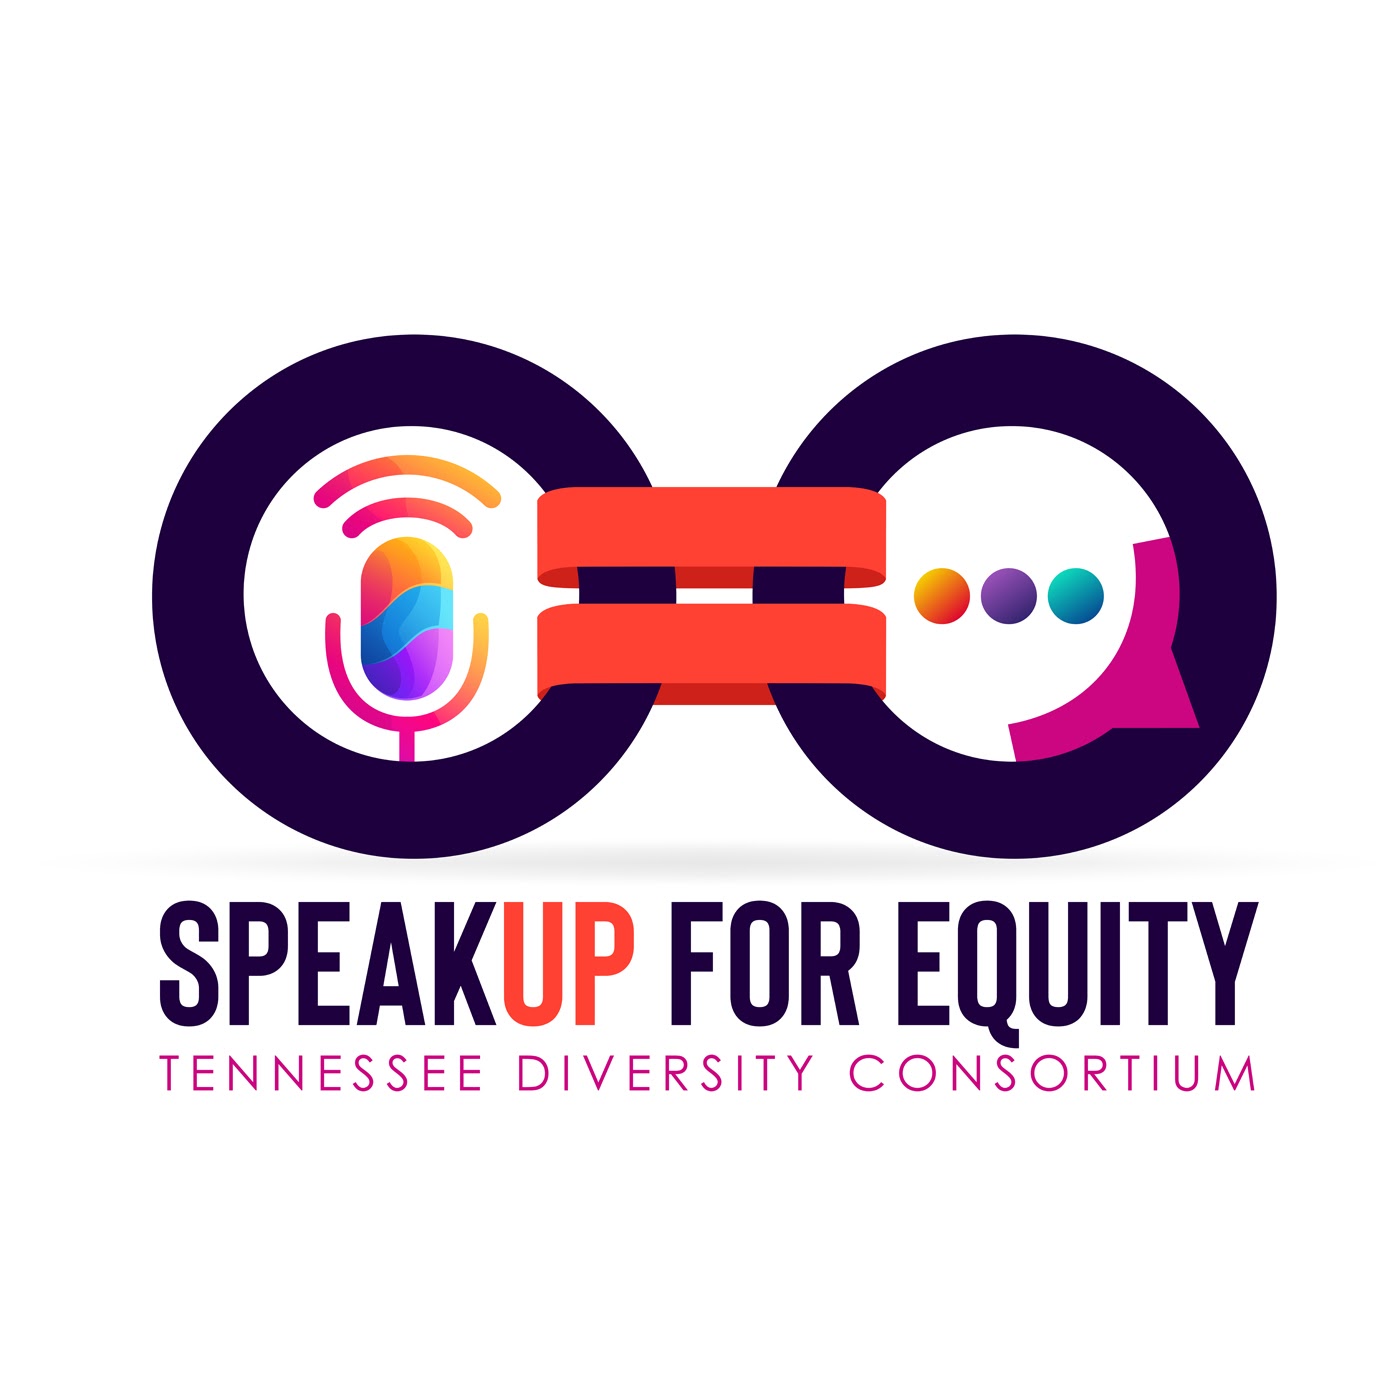 Speak up for Equity explores methods for developing diversity, equity, and inclusion in organizations.